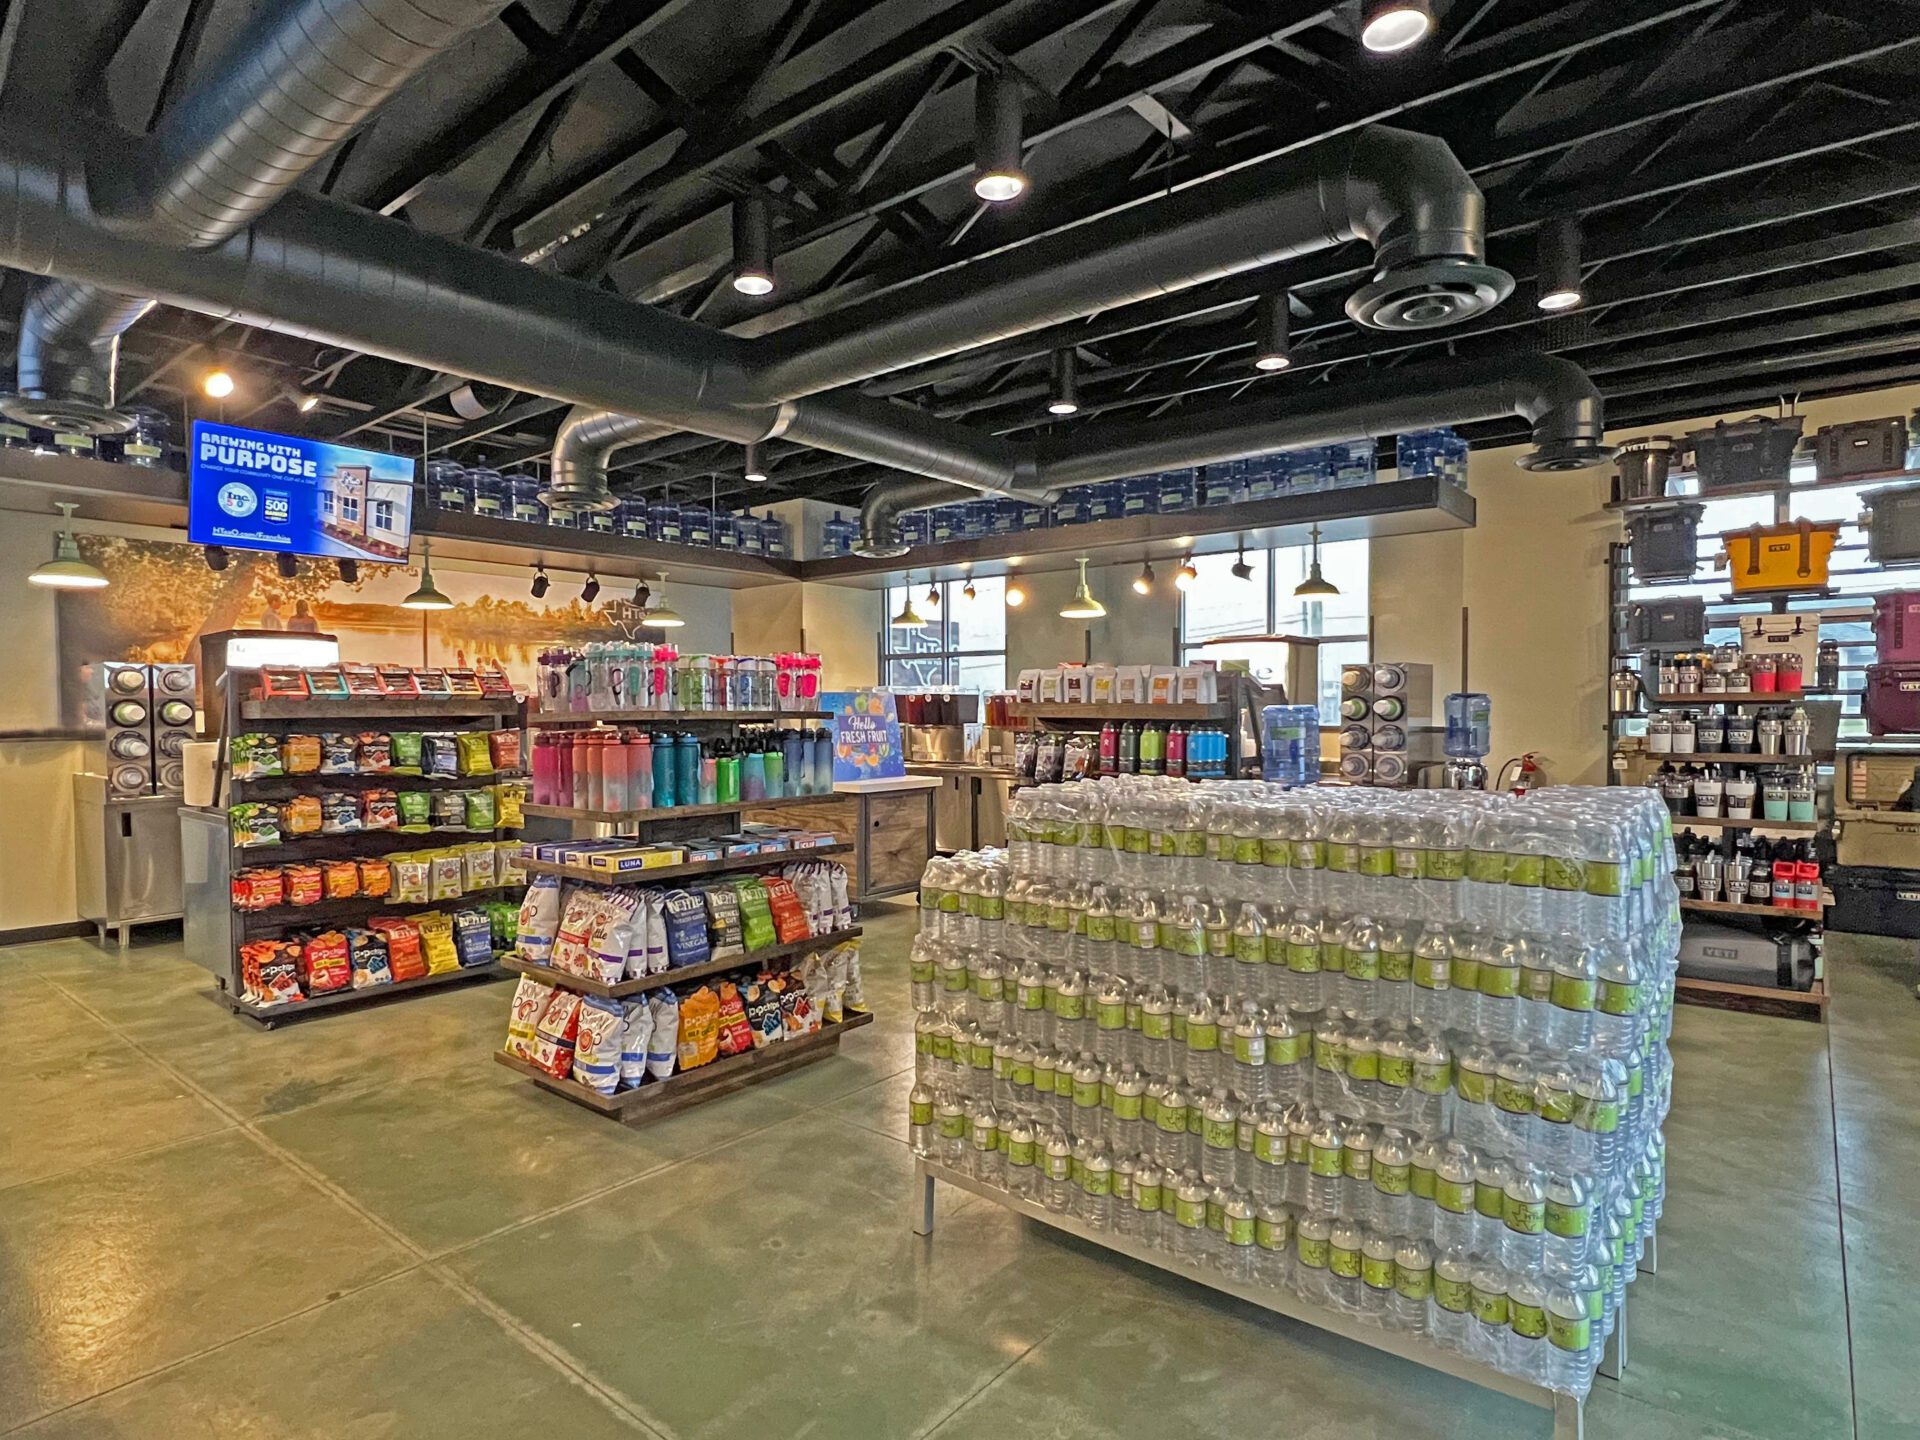 Overview of the inside of the building, with different displays featuring merchandise, snacks, and water.